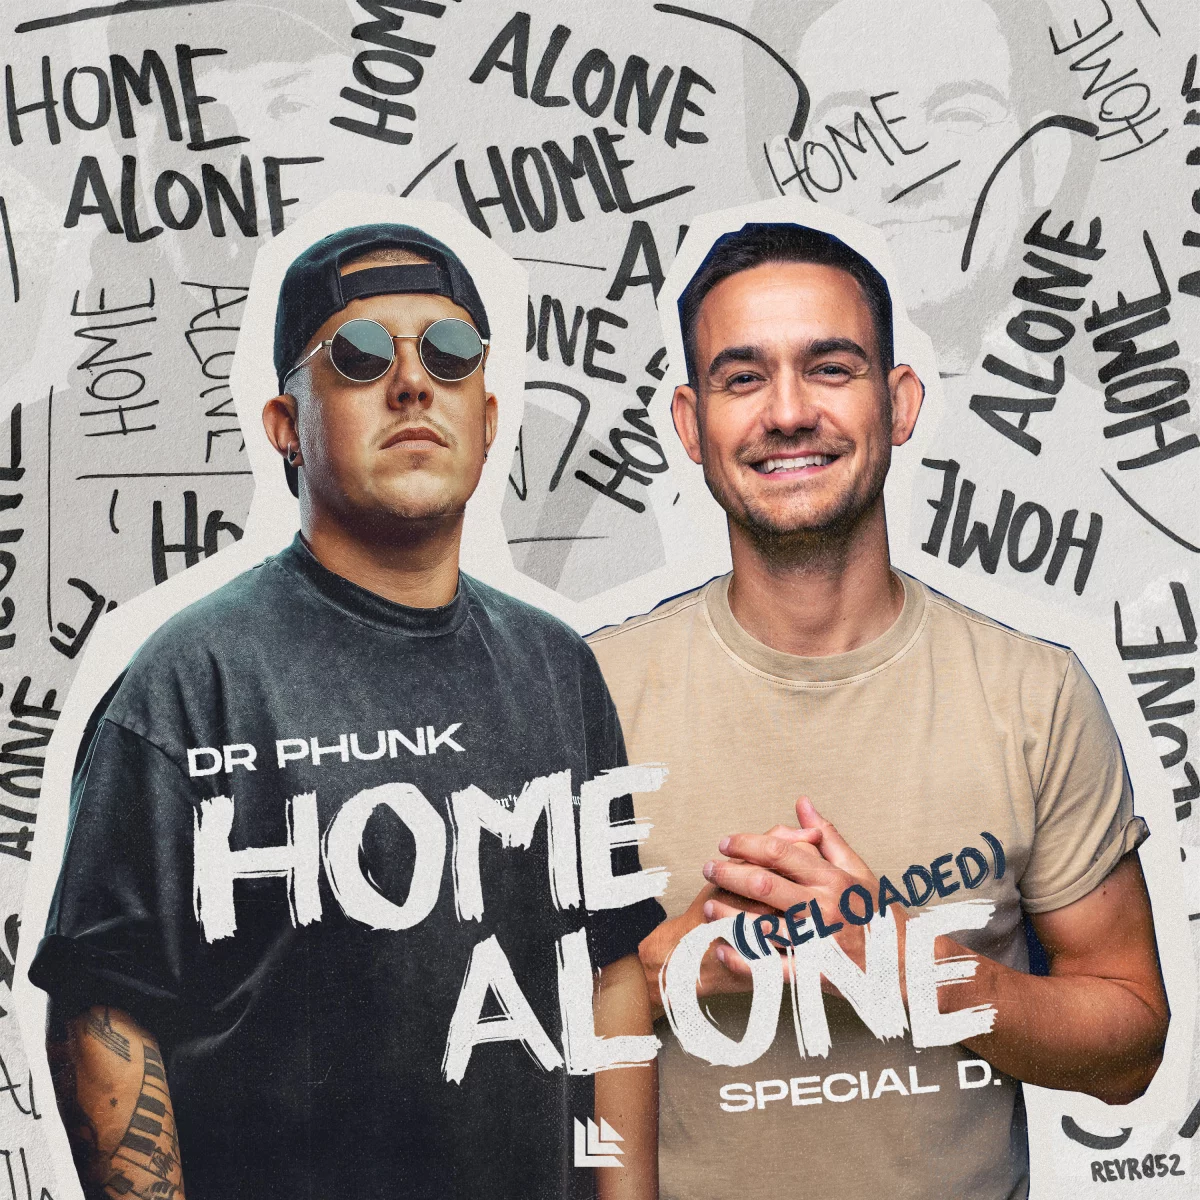 Home Alone (Reloaded) - Dr Phunk⁠ & Special D.⁠ 